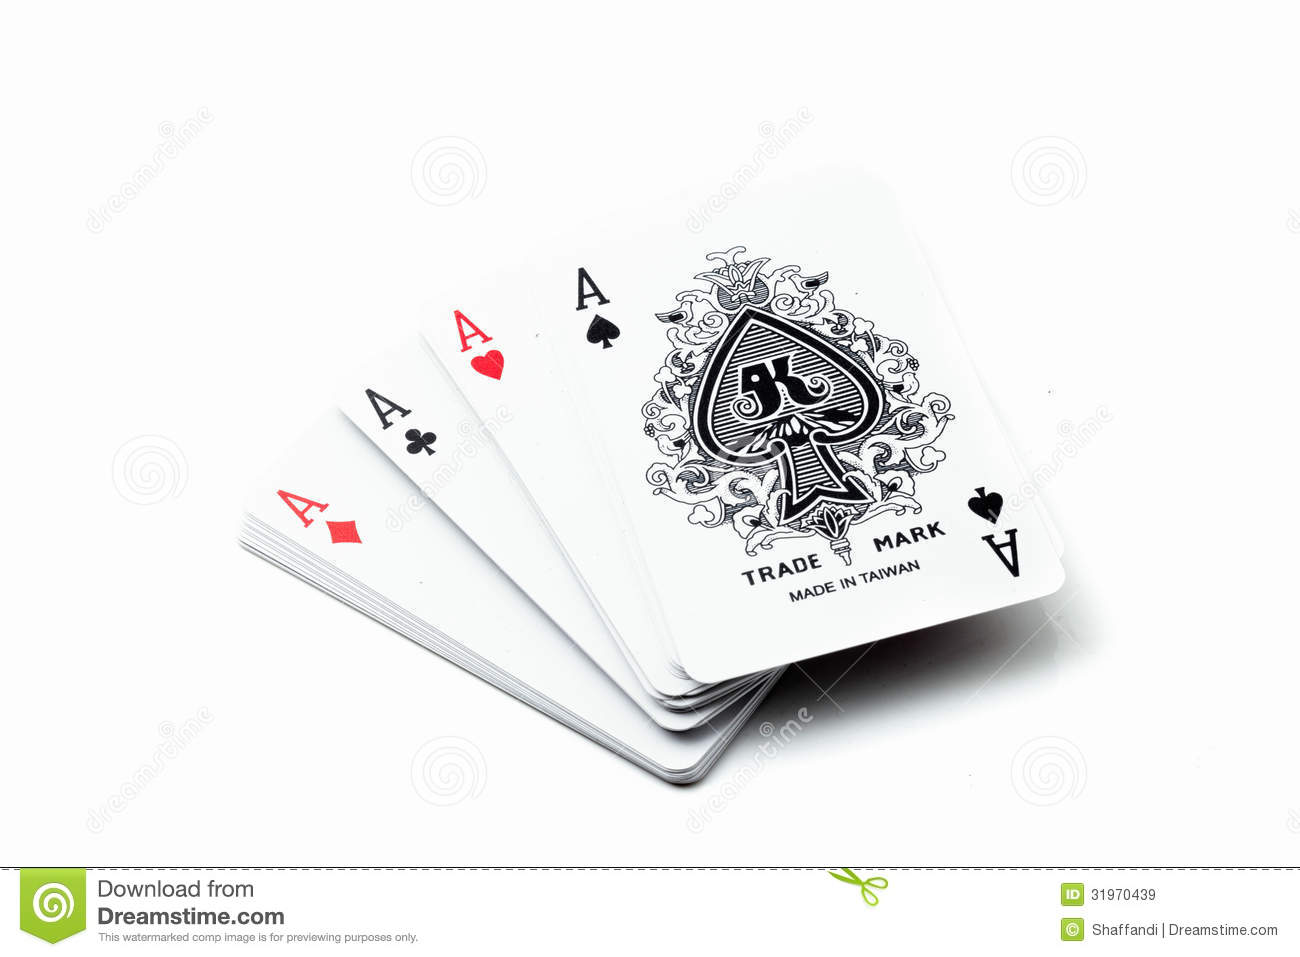 Poker Hands Order Of Suits